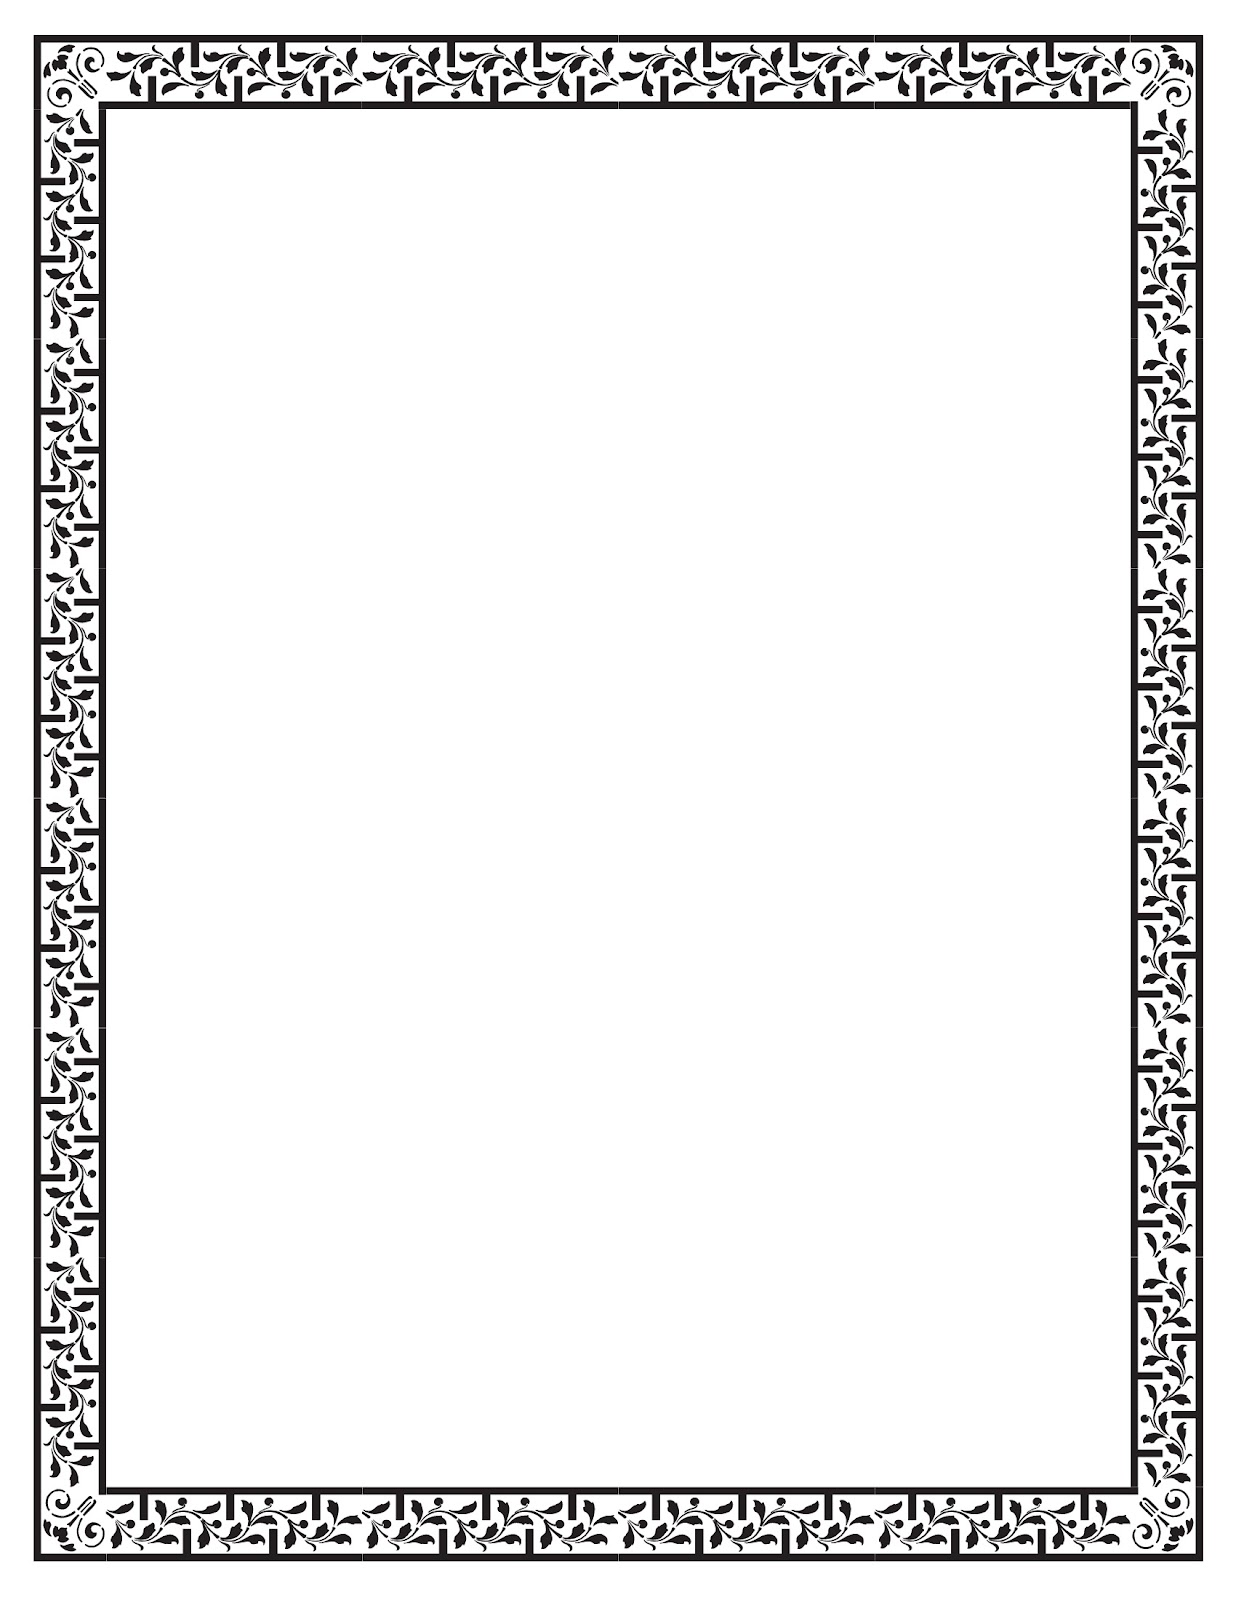 clipart of photo frames - photo #43